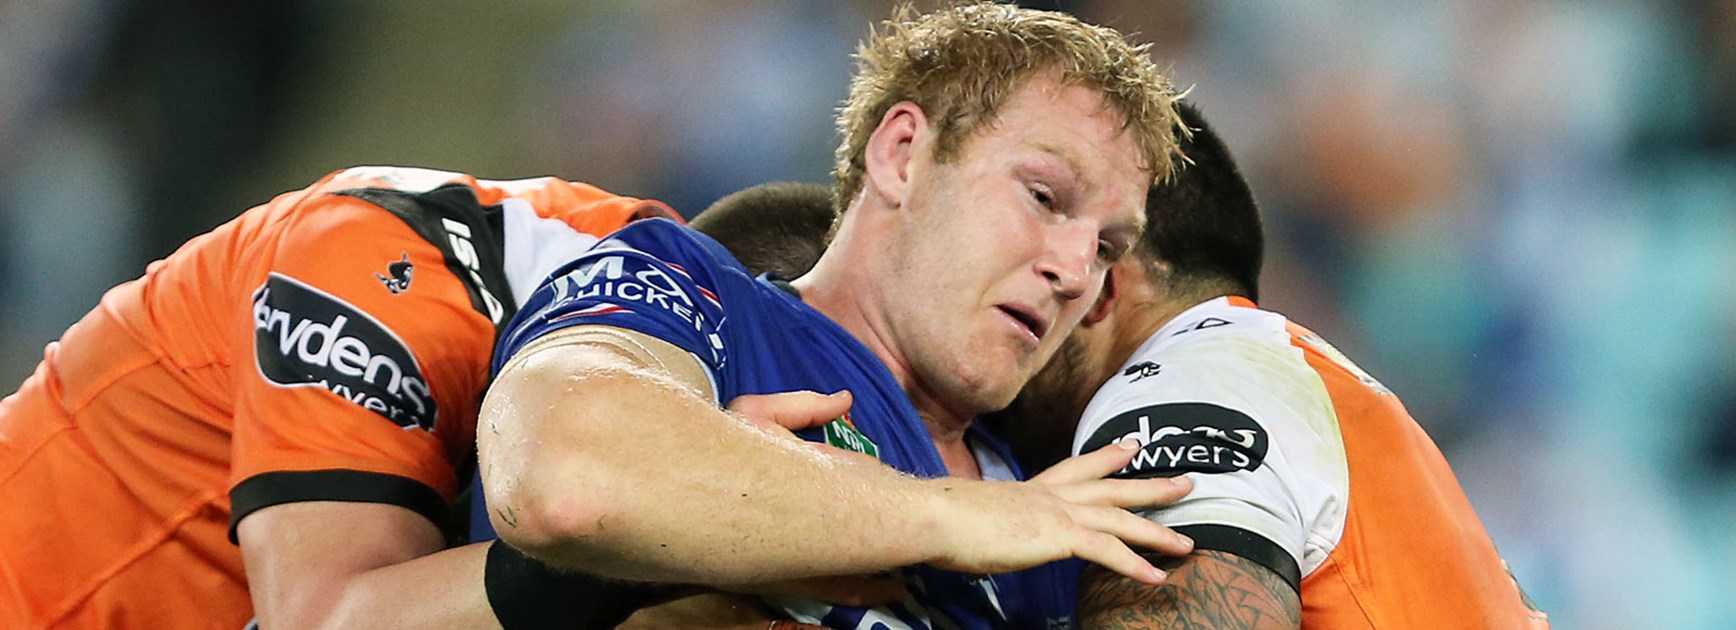 Bulldogs prop Aiden Tolman played 80 minutes against the Tigers in Round 18.